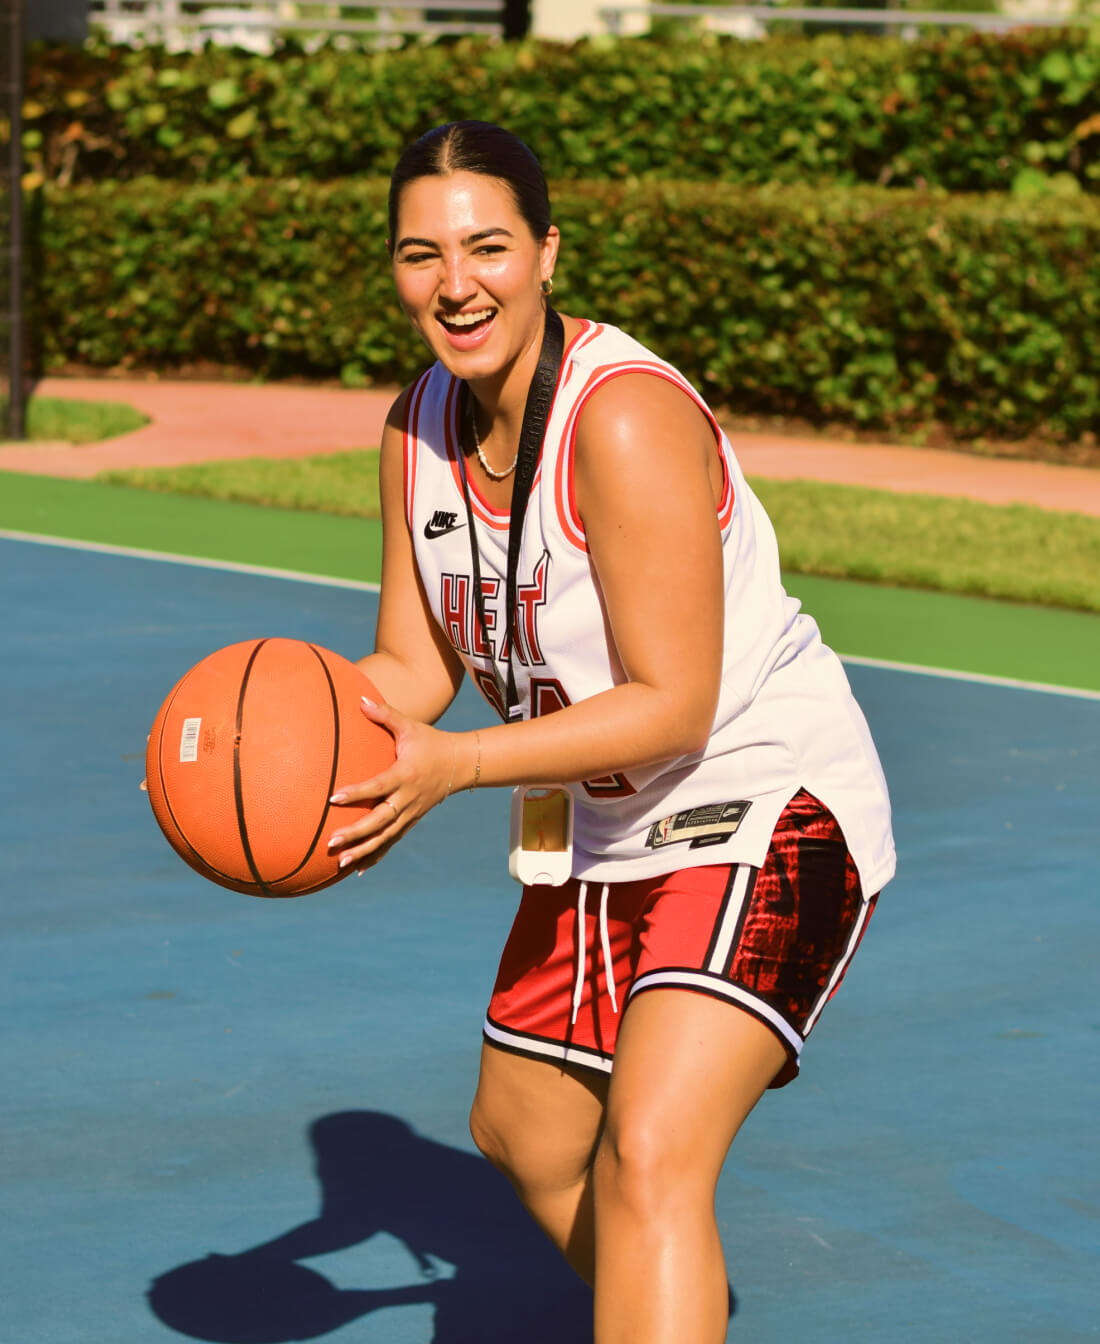 A woman smiling while playing basketball with the Citrus Grove Power Mist attached to a black Touchland Lanyard around her neck.